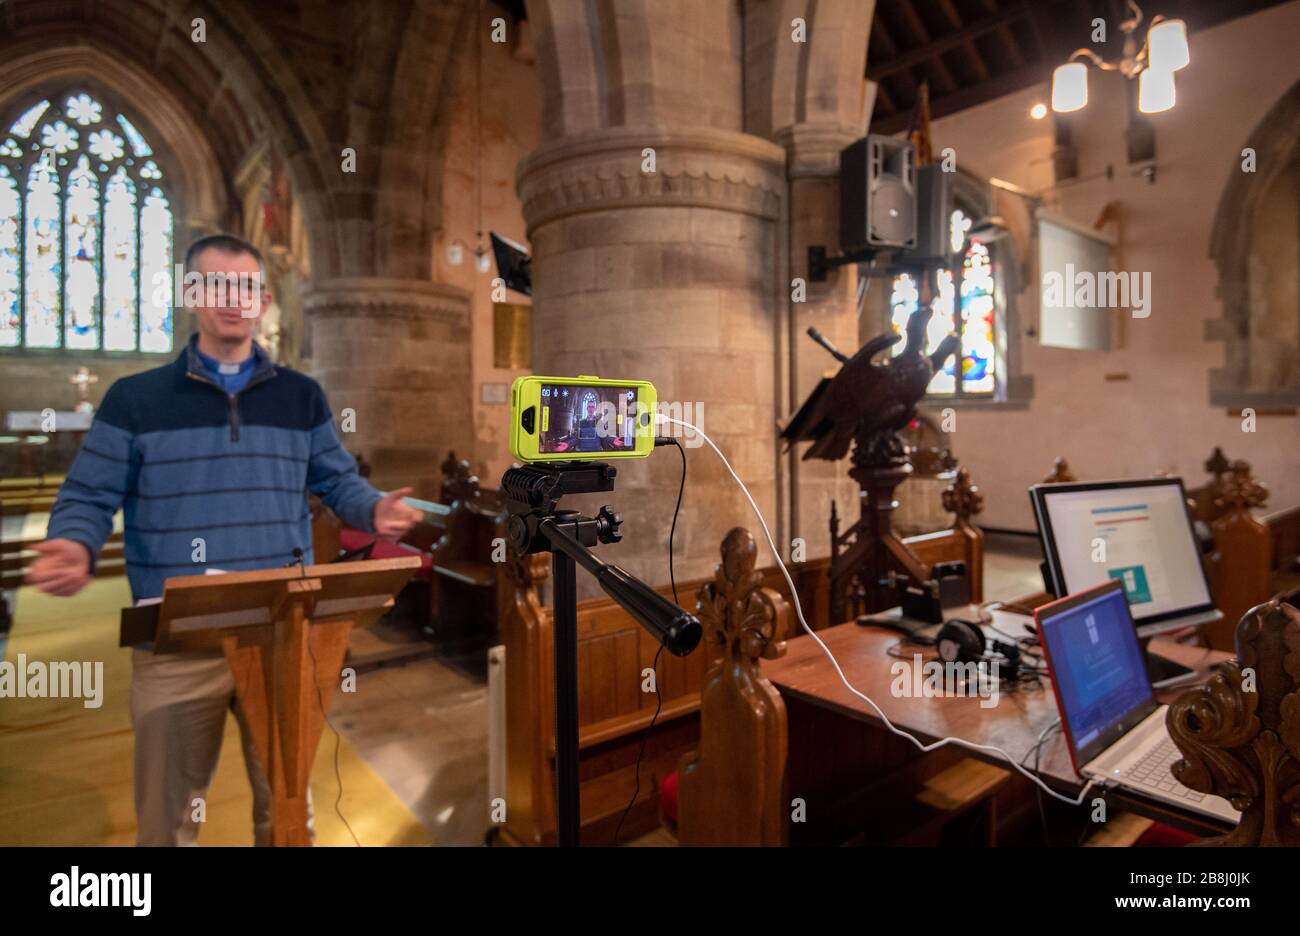 Rector Rob Miles gives his sermon during a live streaming of the Sunday church service at St Lukes Church in Thurnby, Leicester, after the archbishops of Canterbury and York wrote to clergy on Tuesday advising them to put public services on hold in response to Government advice to avoid mass gatherings to help prevent the spread of the Covid-19 virus. Stock Photo